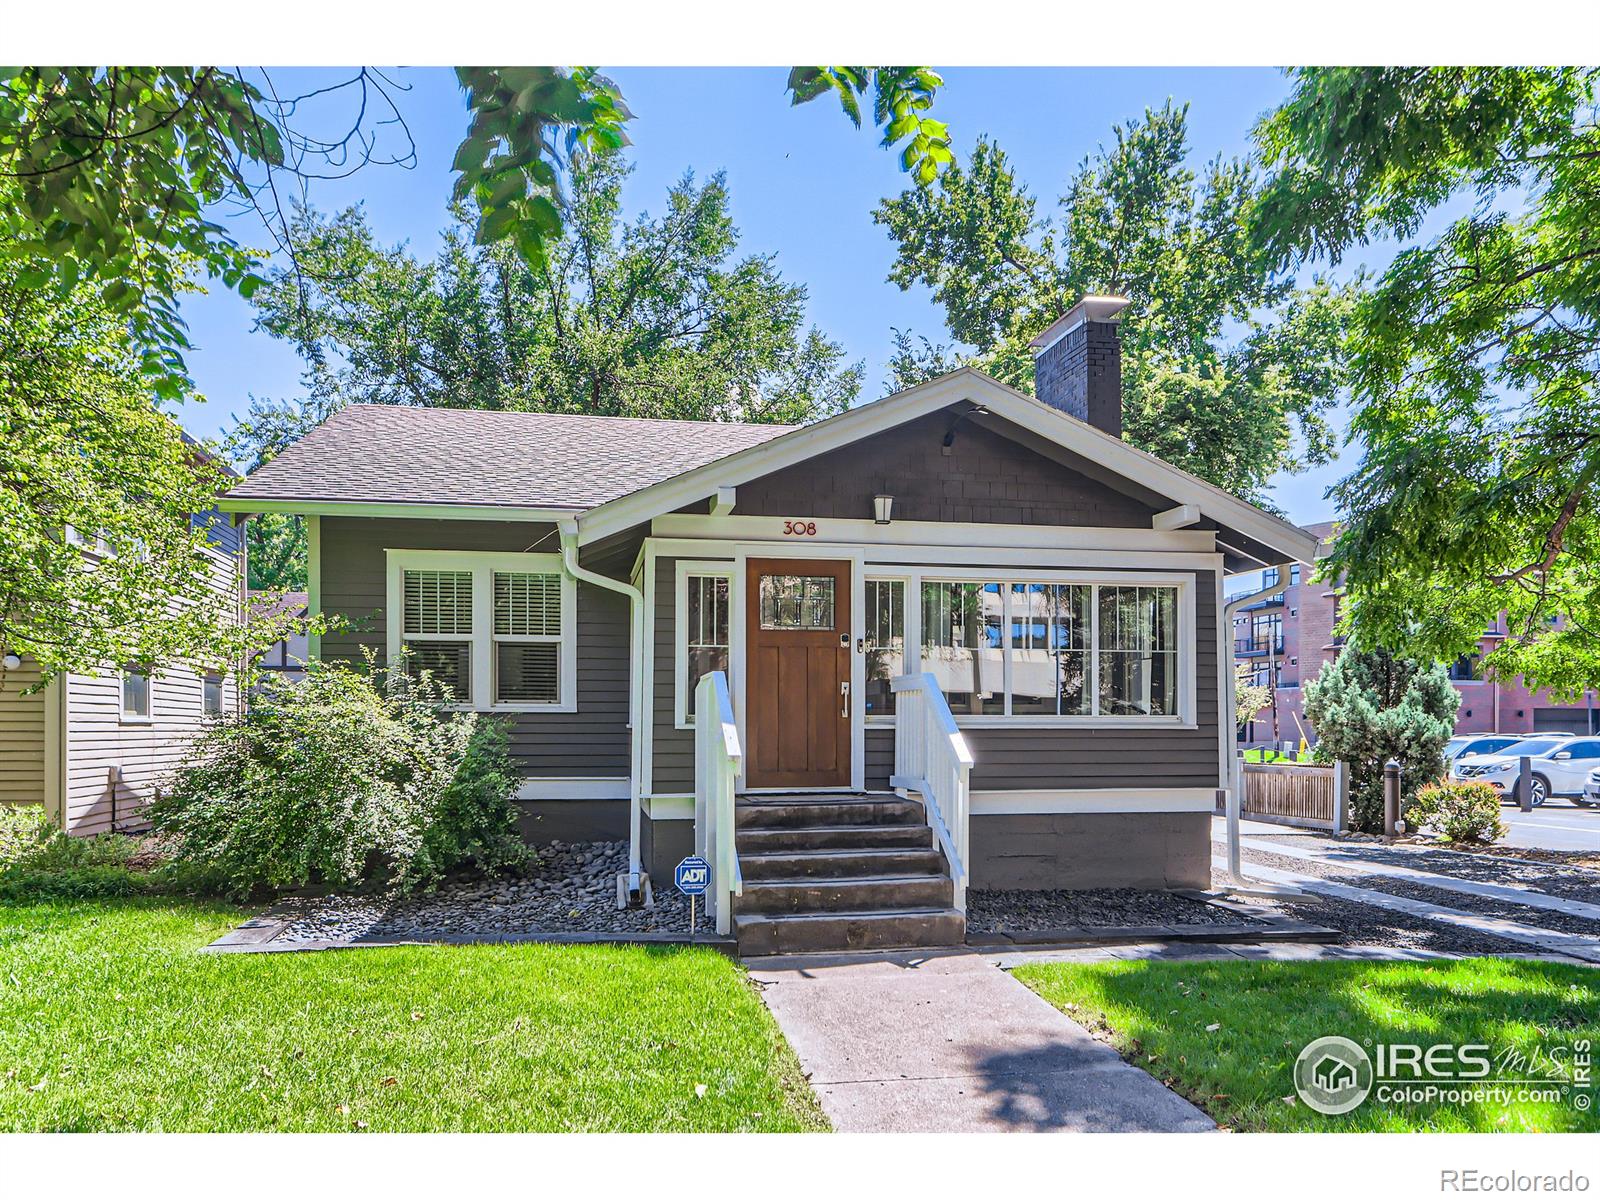 308 S Howes Street, fort collins MLS: 123456789994033 Beds: 3 Baths: 3 Price: $869,000